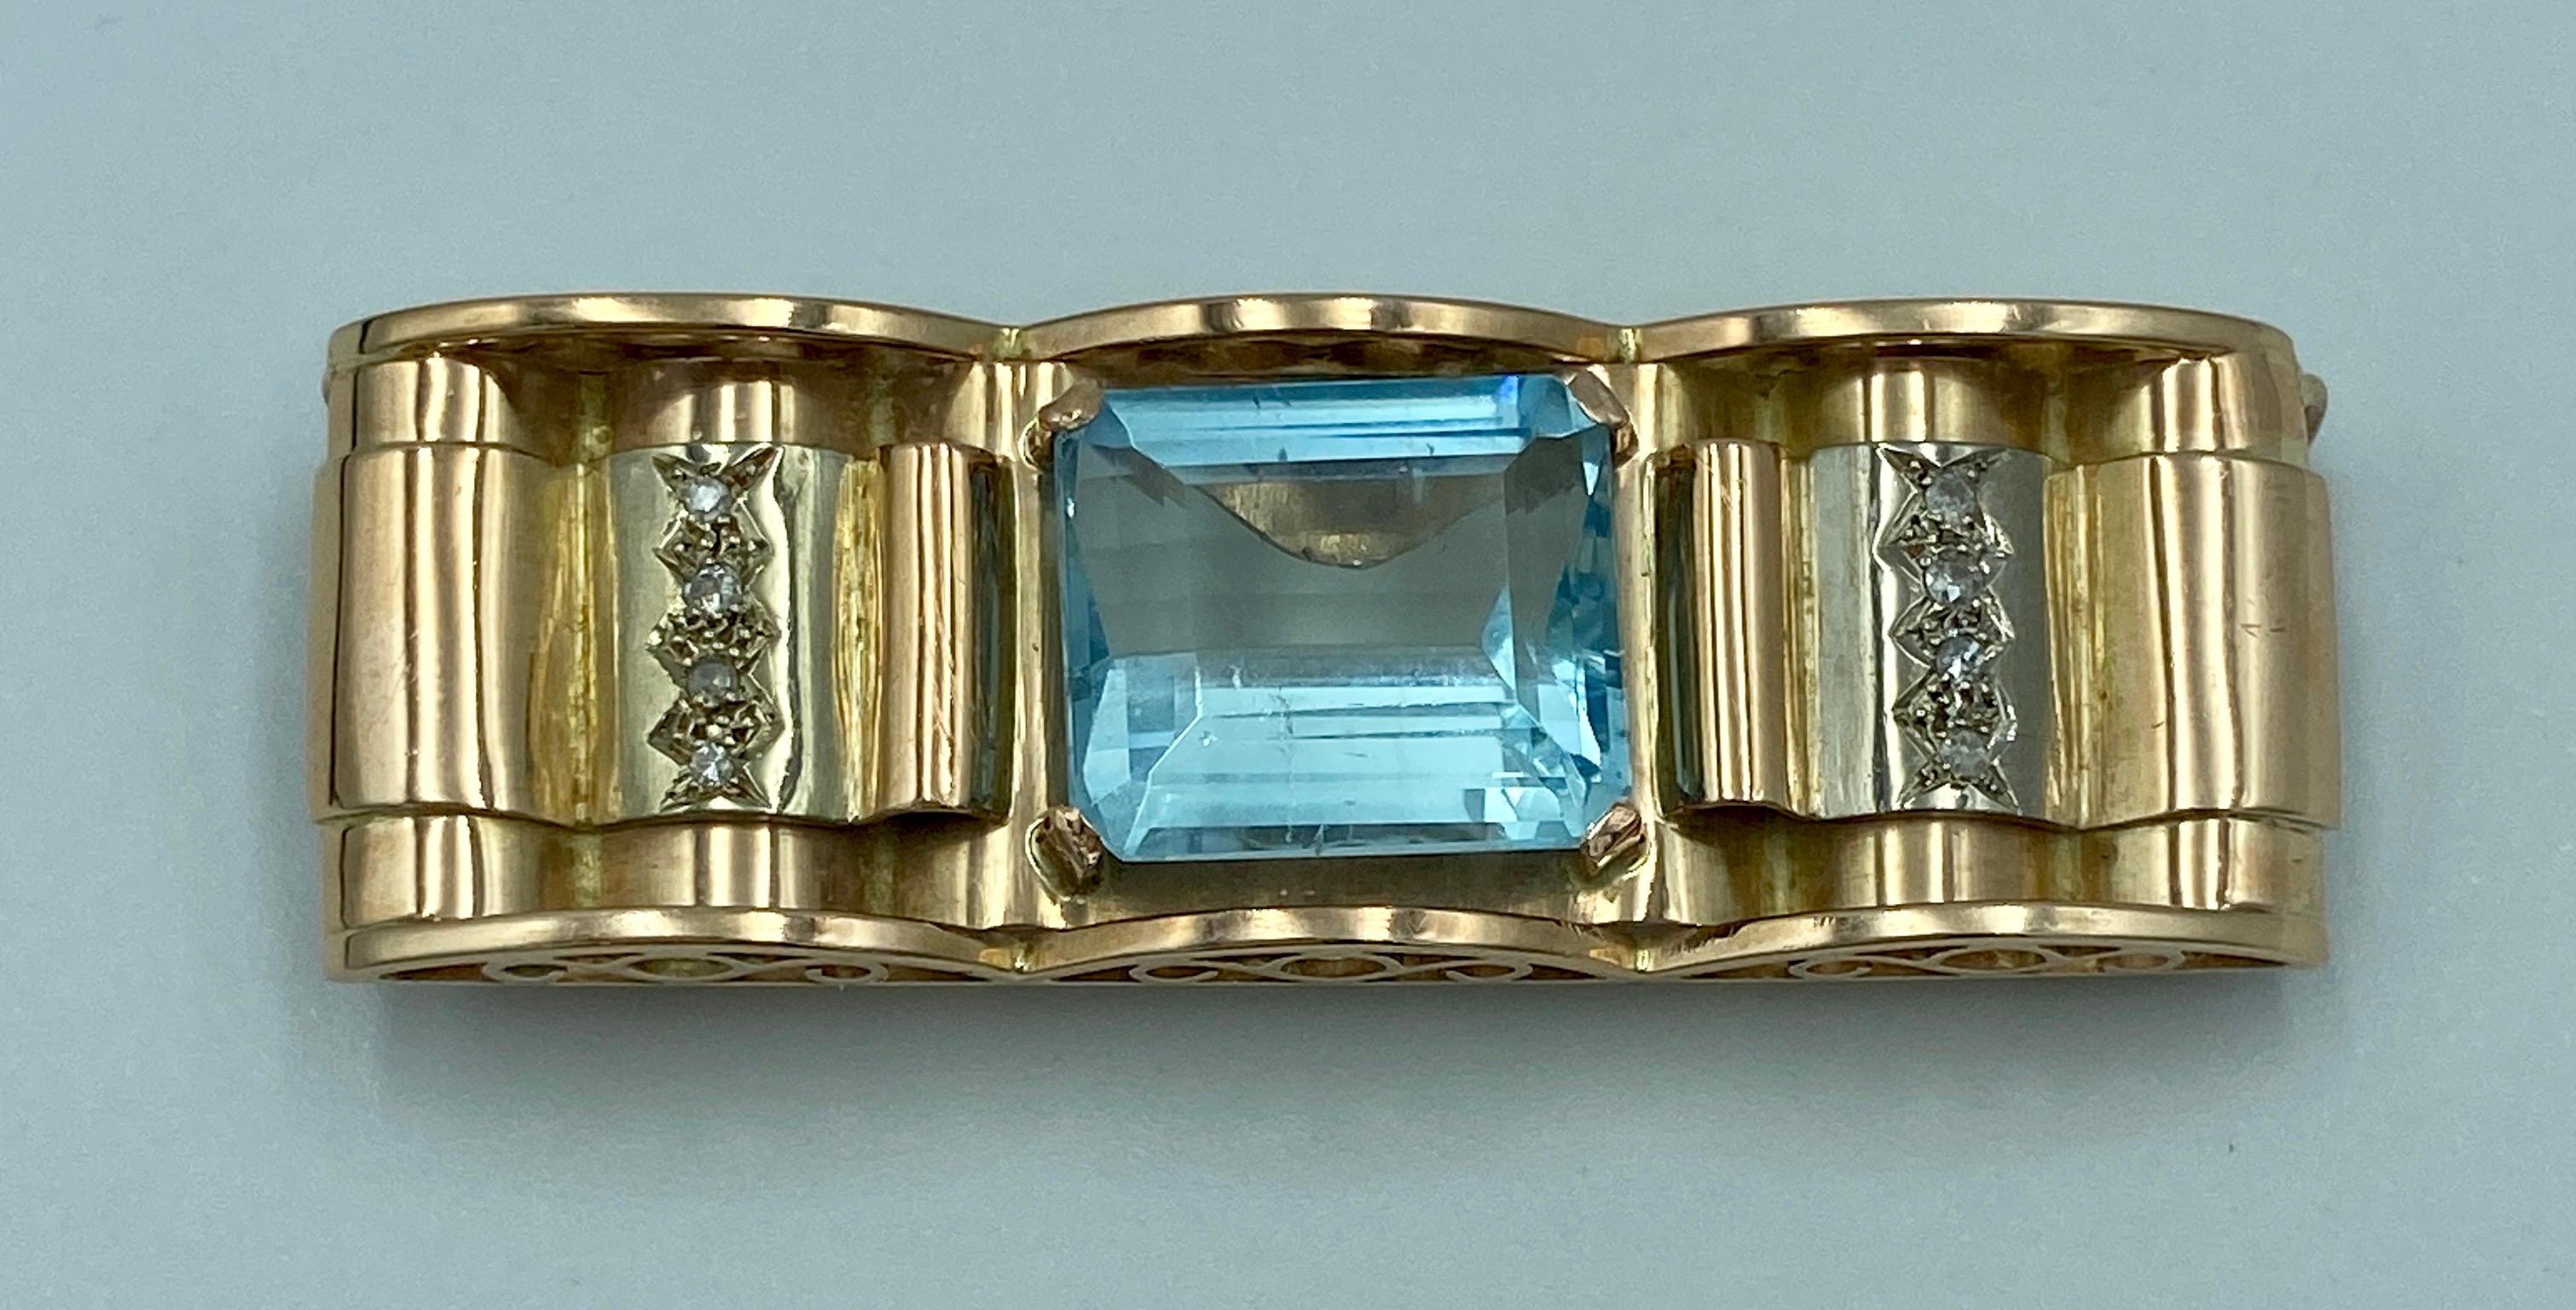 This beautiful brooch made in France in 1950s is made of 18 carat gold and features a single emerald cut aquamarine of approximately 12 carats and a total of 0.25 carat single cut diamonds. 

It is a stunning piece on its own but is spectacular with